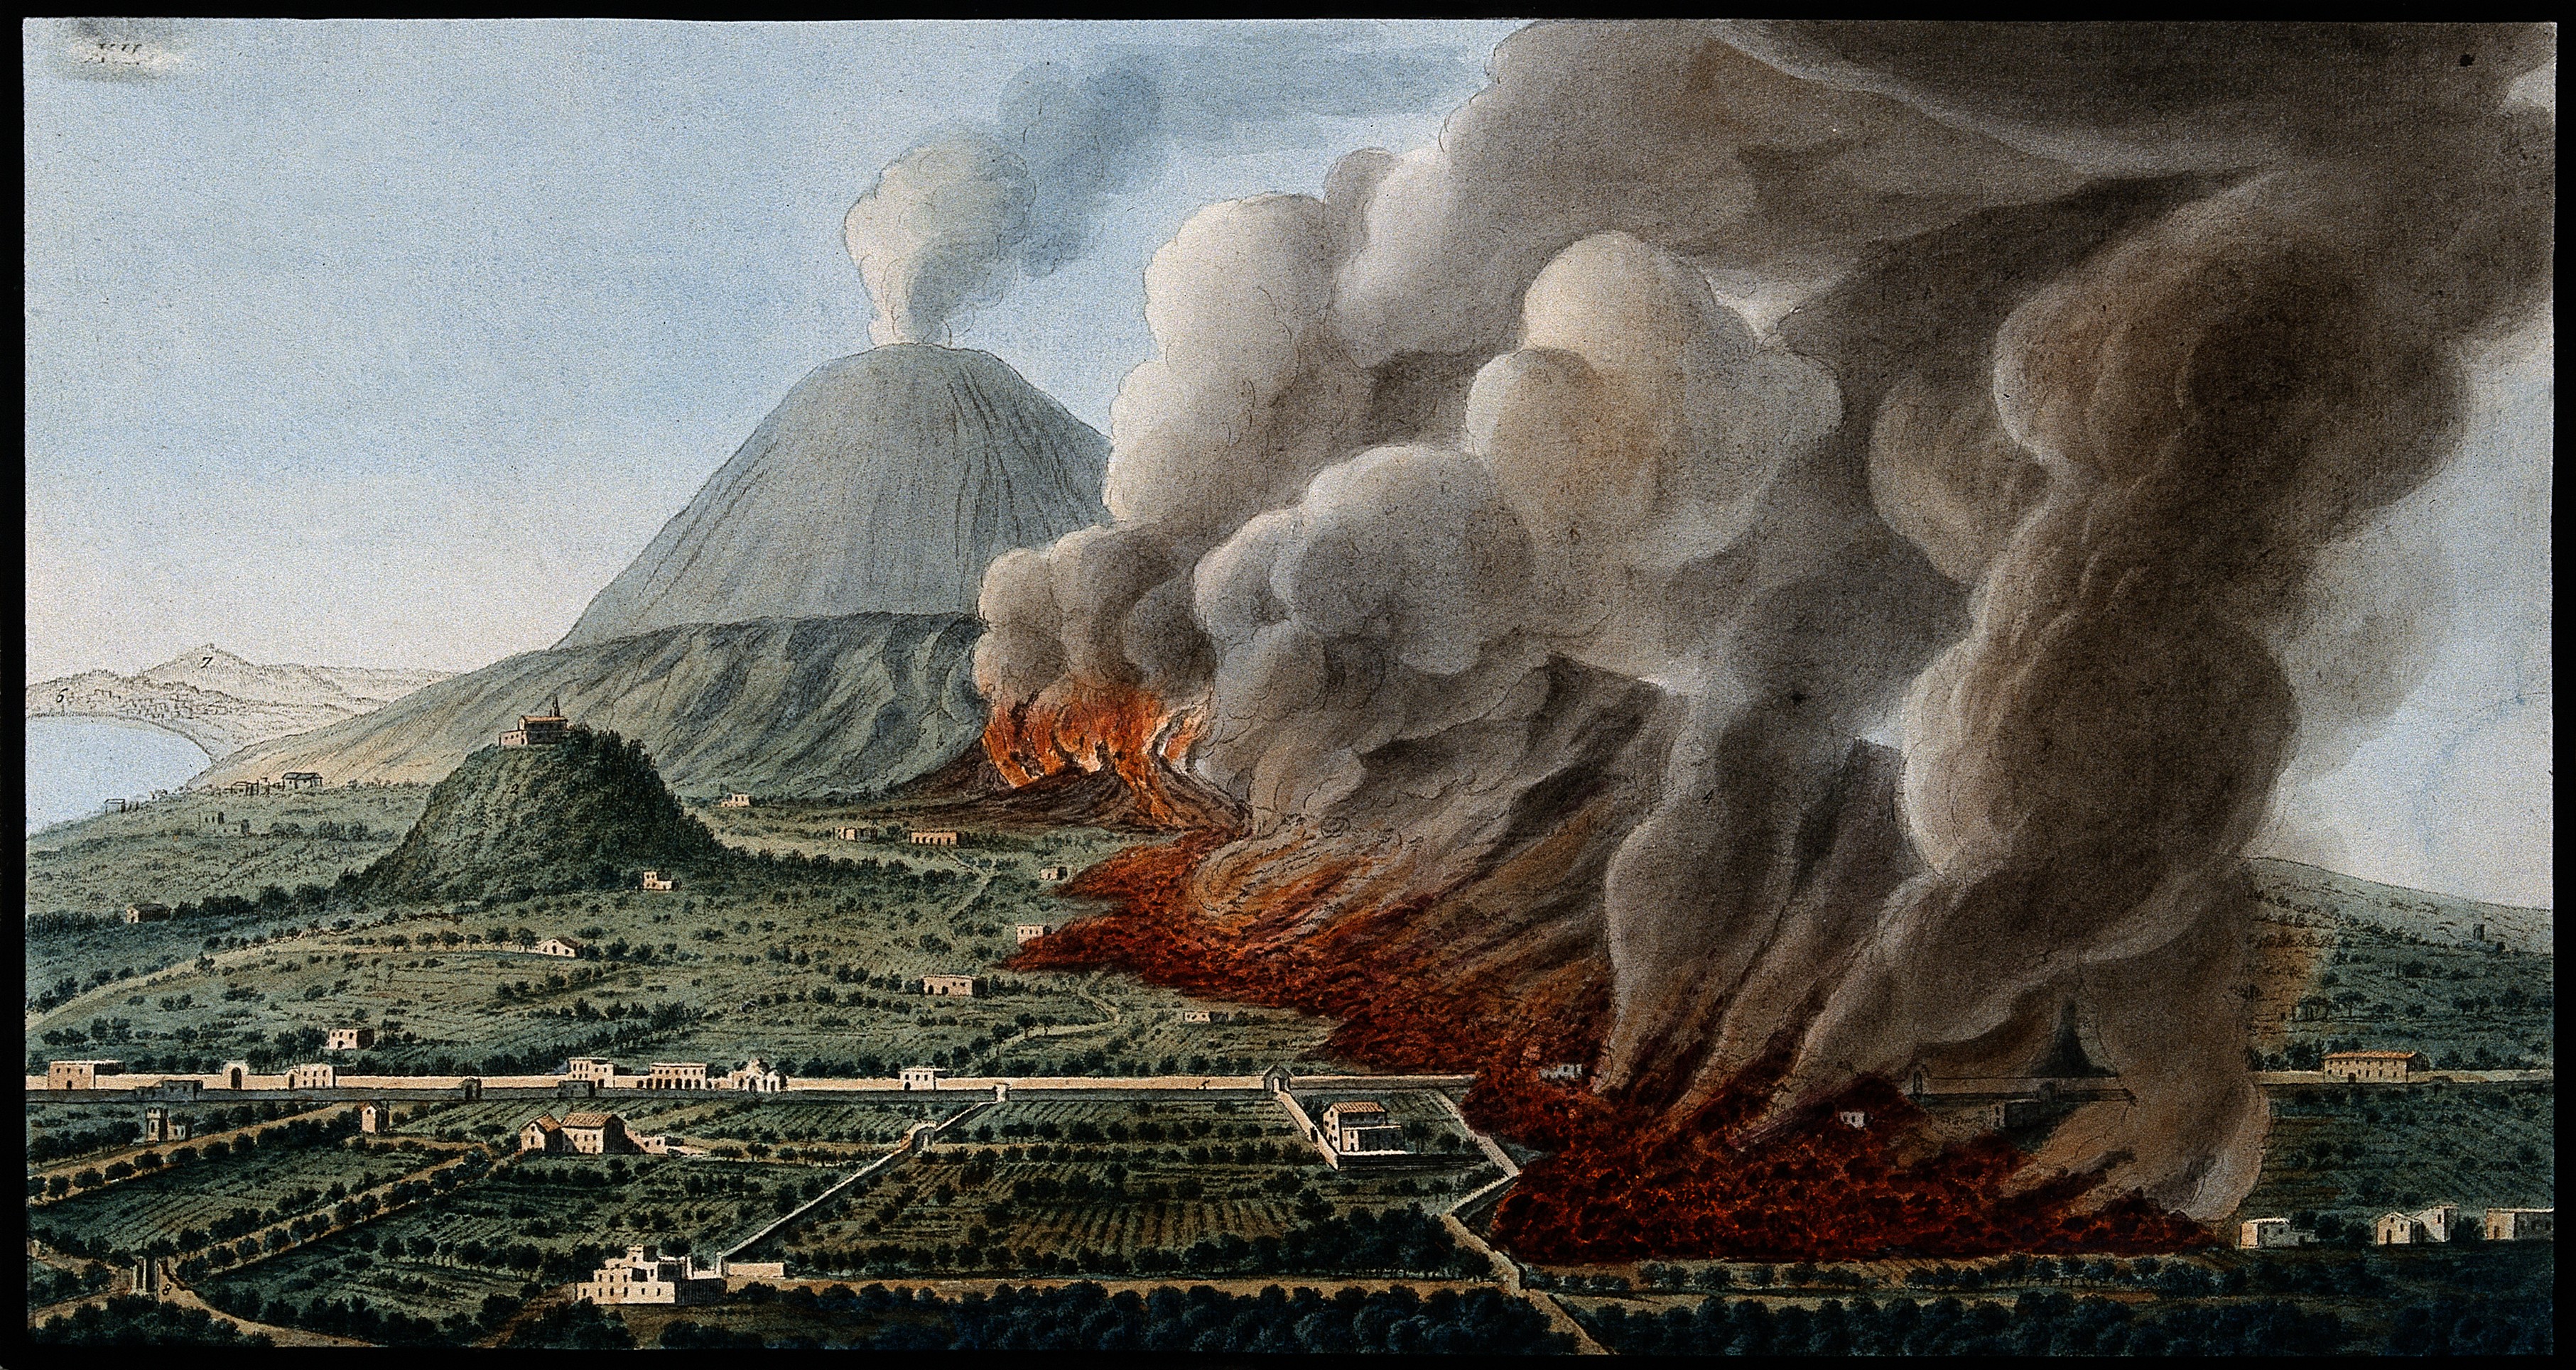 A stunning sketch capturing the Vesuvius Challenge, depicting a majestic volcano billowing smoke.